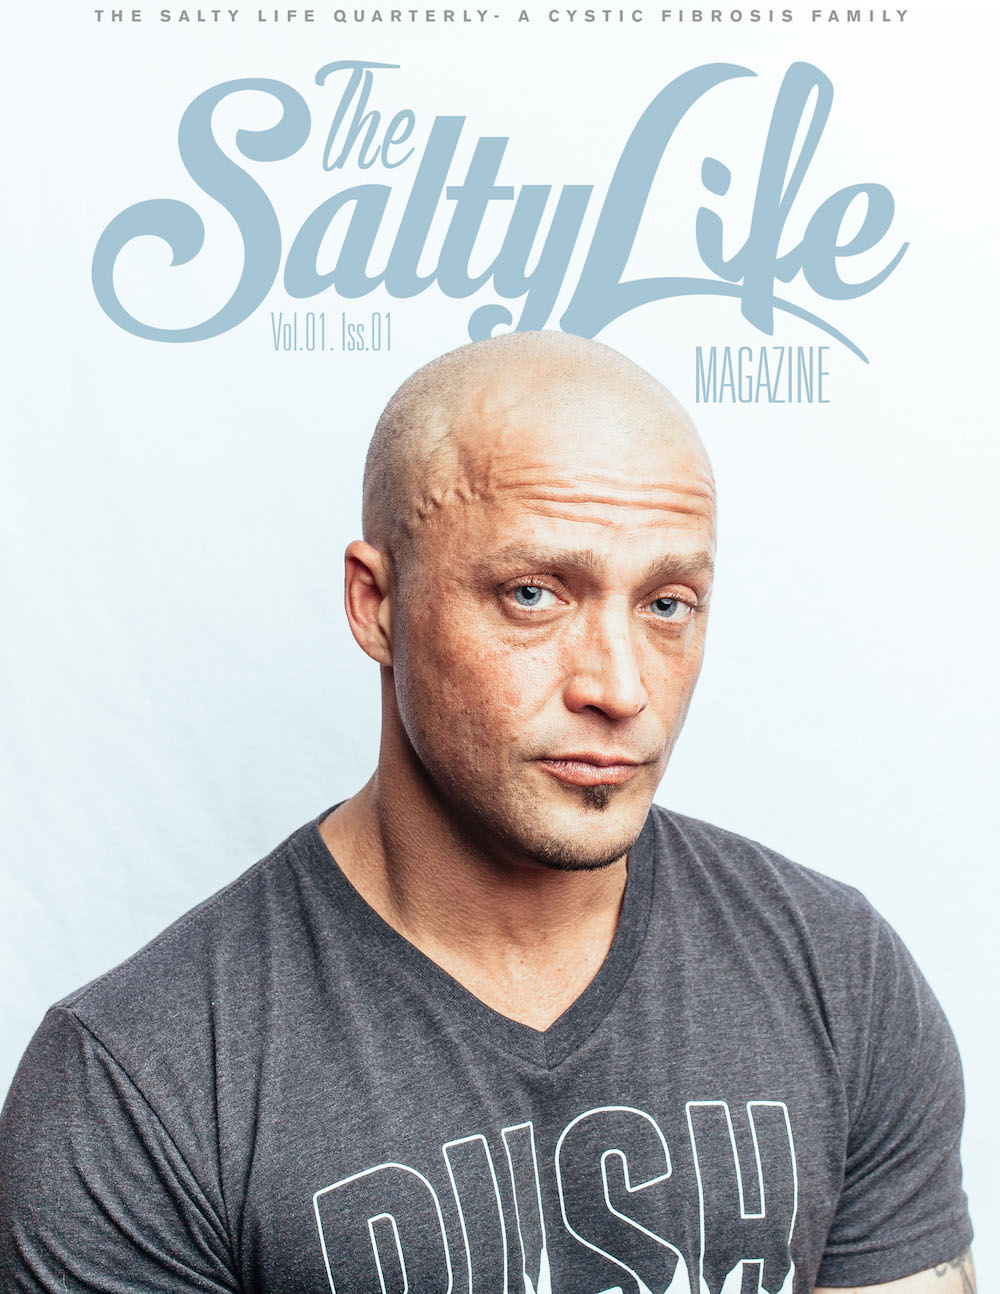 salty life cover featuring bald man